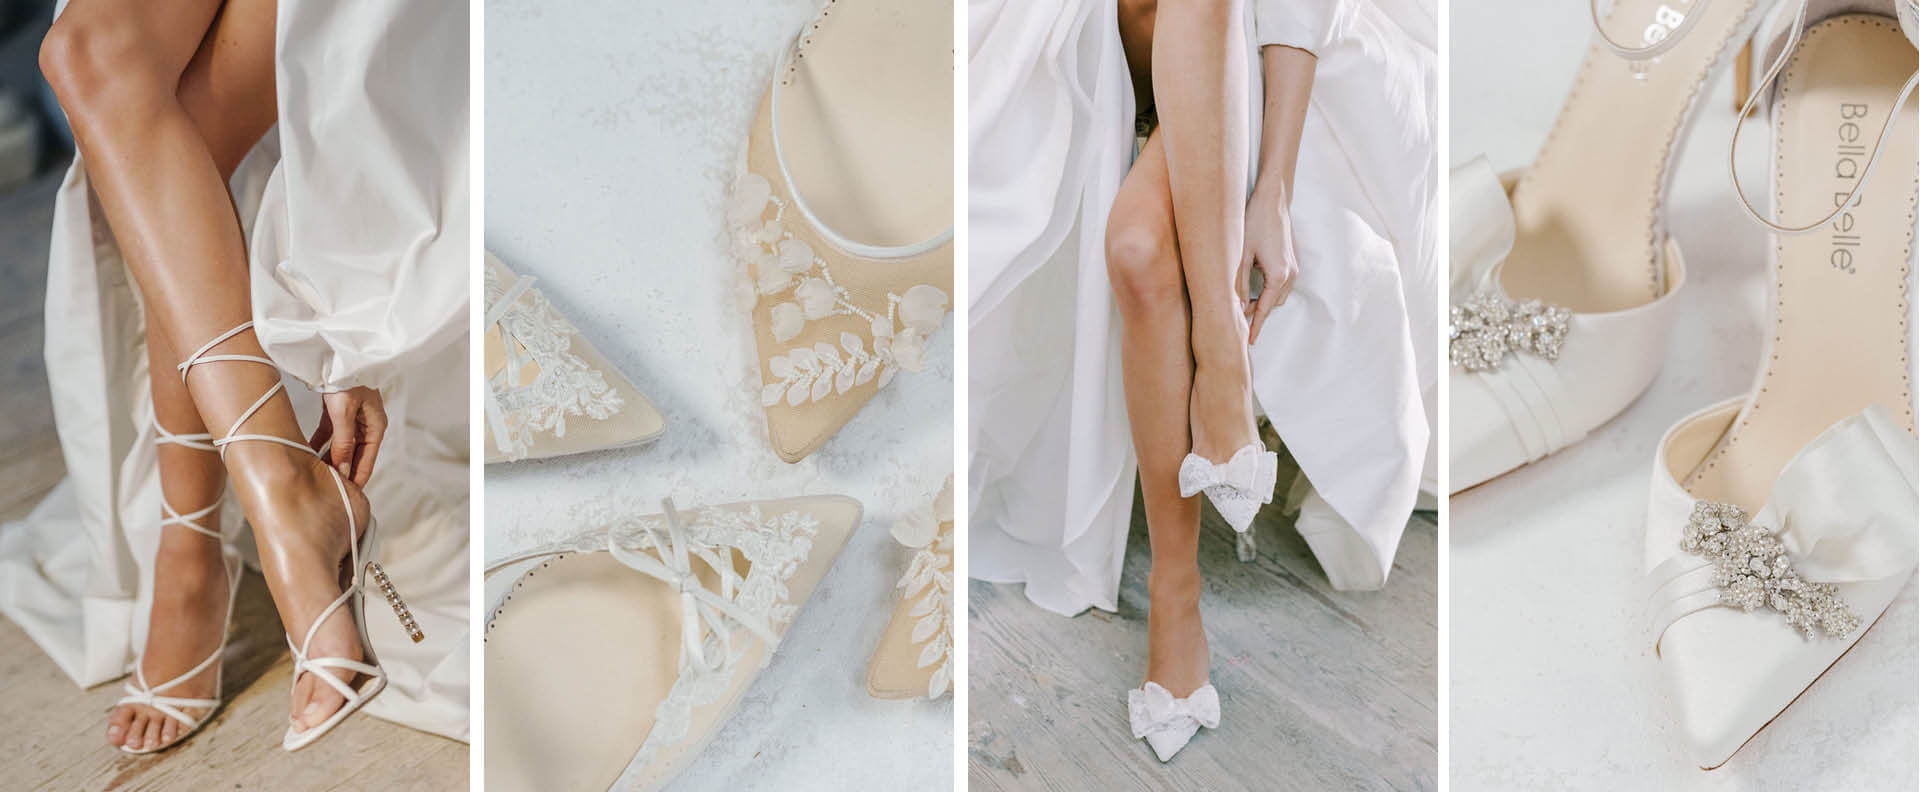 The 2021 Top Wedding Shoes Trends